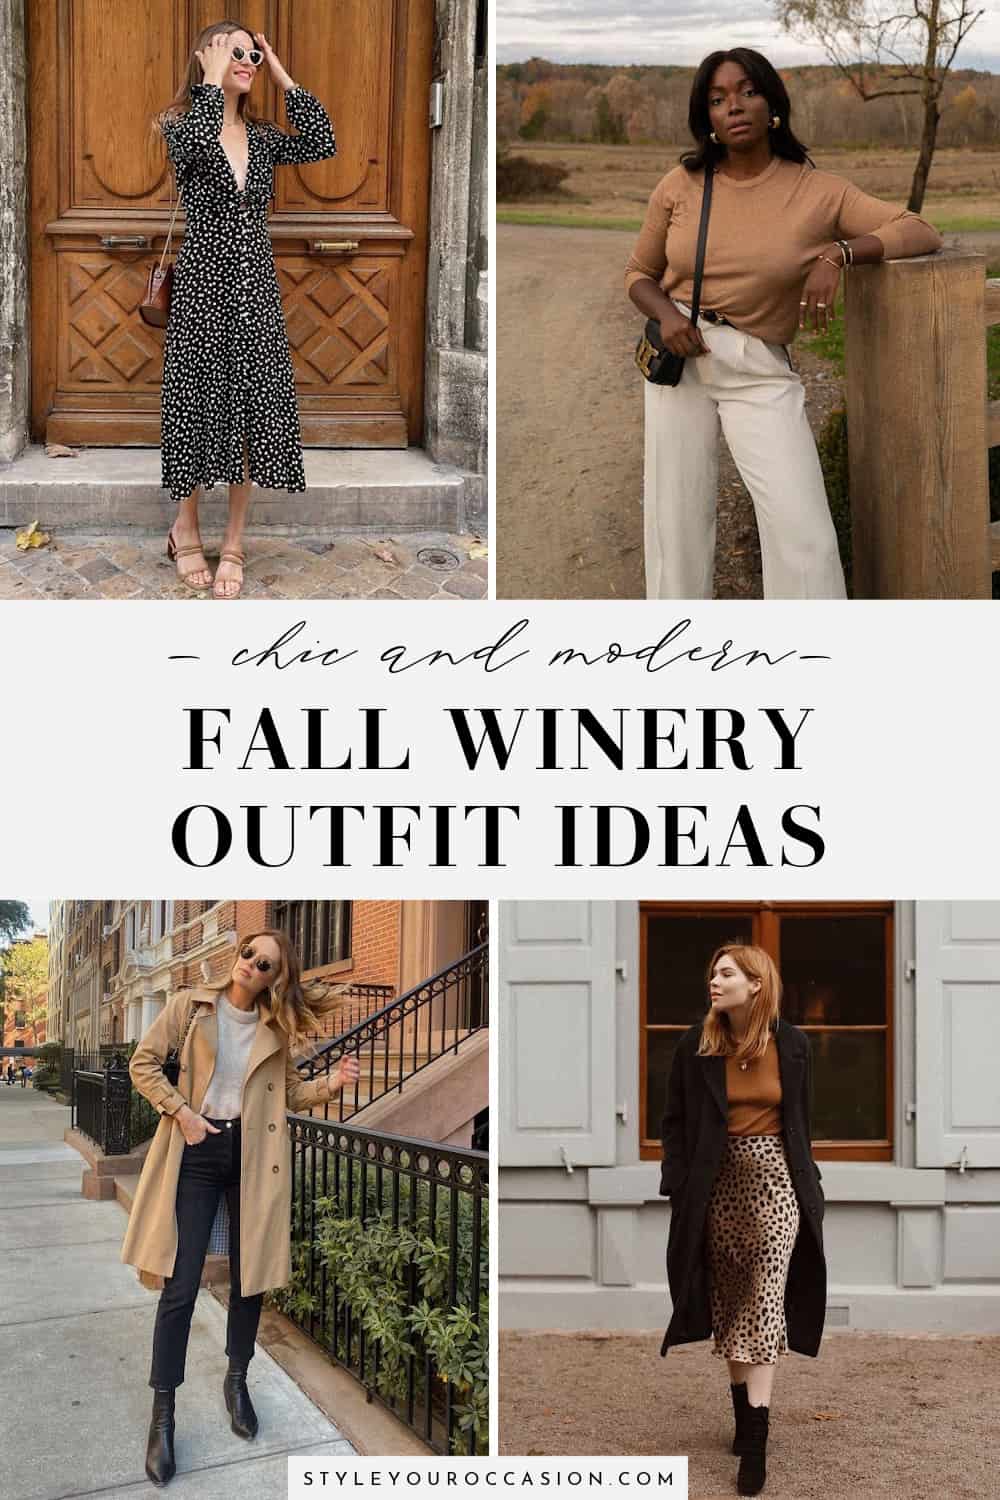 17+ Modern Fall Winery Outfits For Your Next Trip To The Vineyard